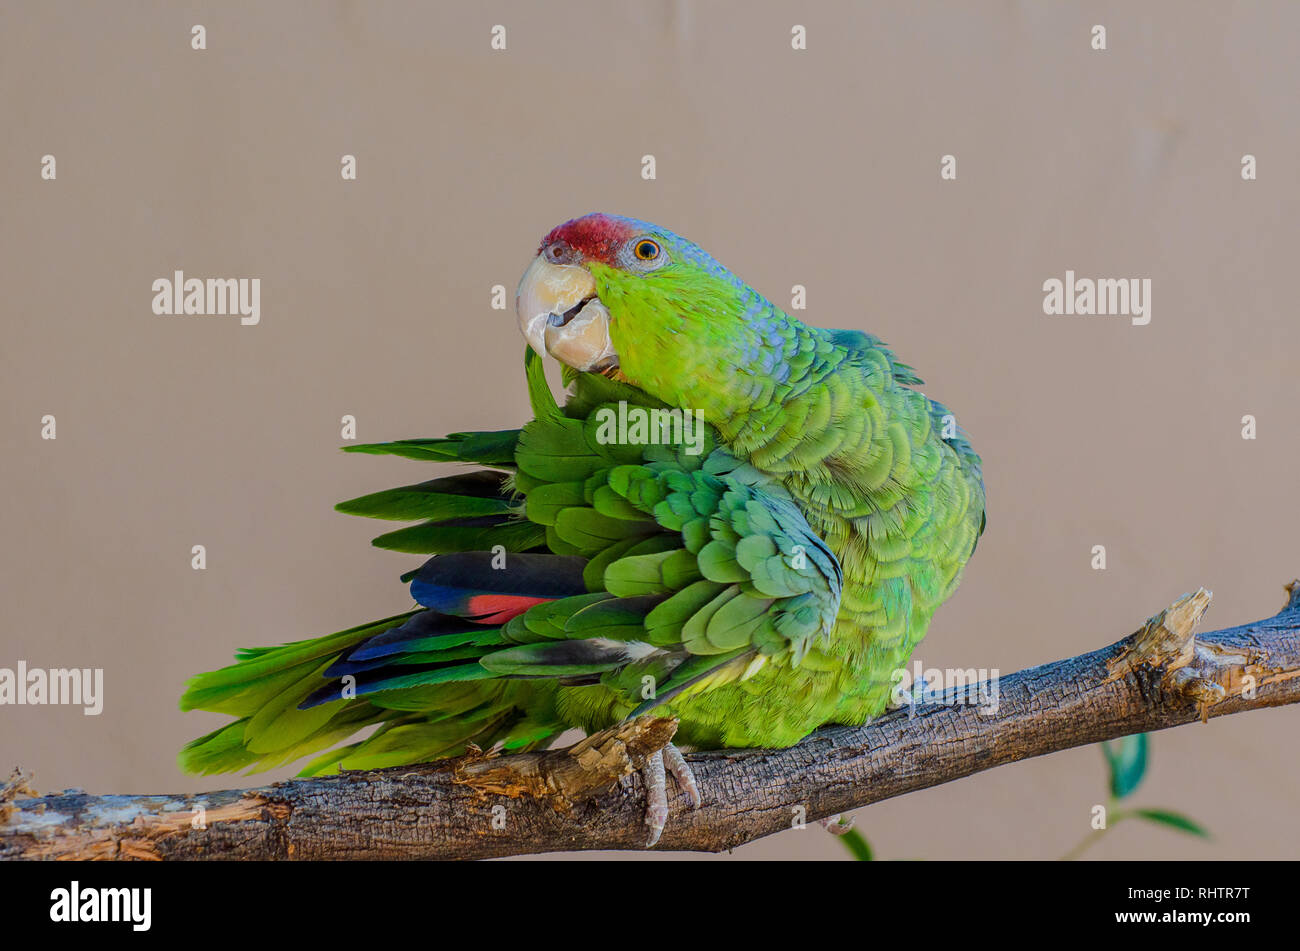 Lilac-crowned Amazon Parrot Grooming her Feathers Stock Photo